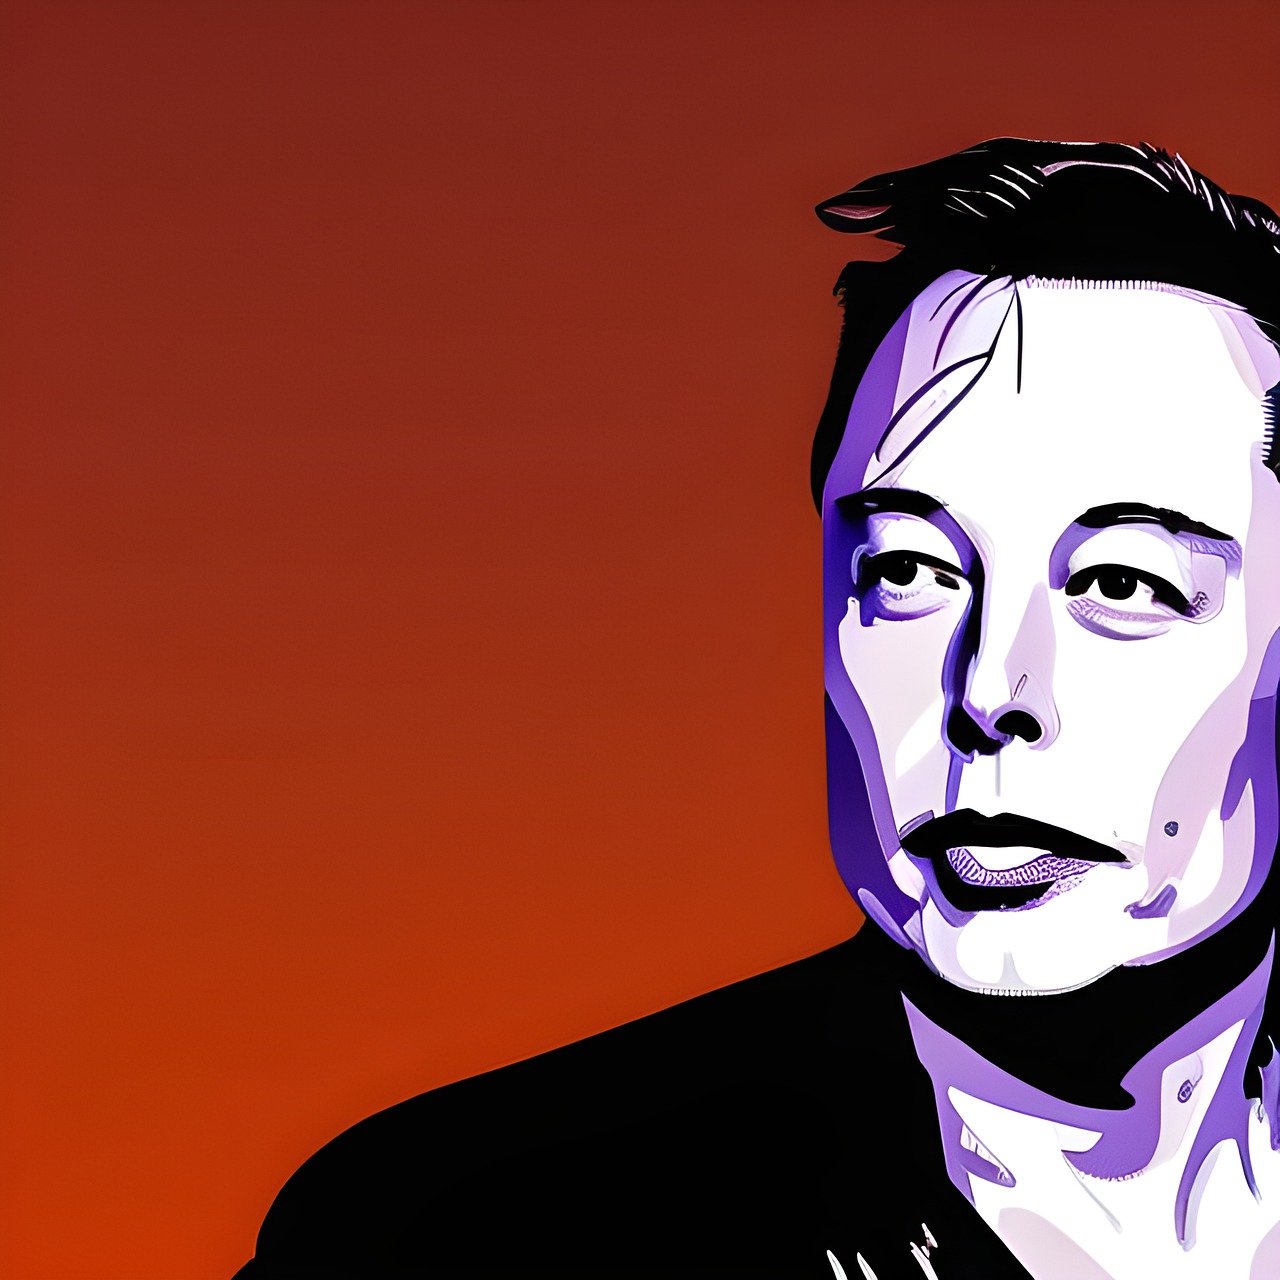 Musk Drops His Lawsuit Against OpenAI After a 3-Month Battle – The TechLead